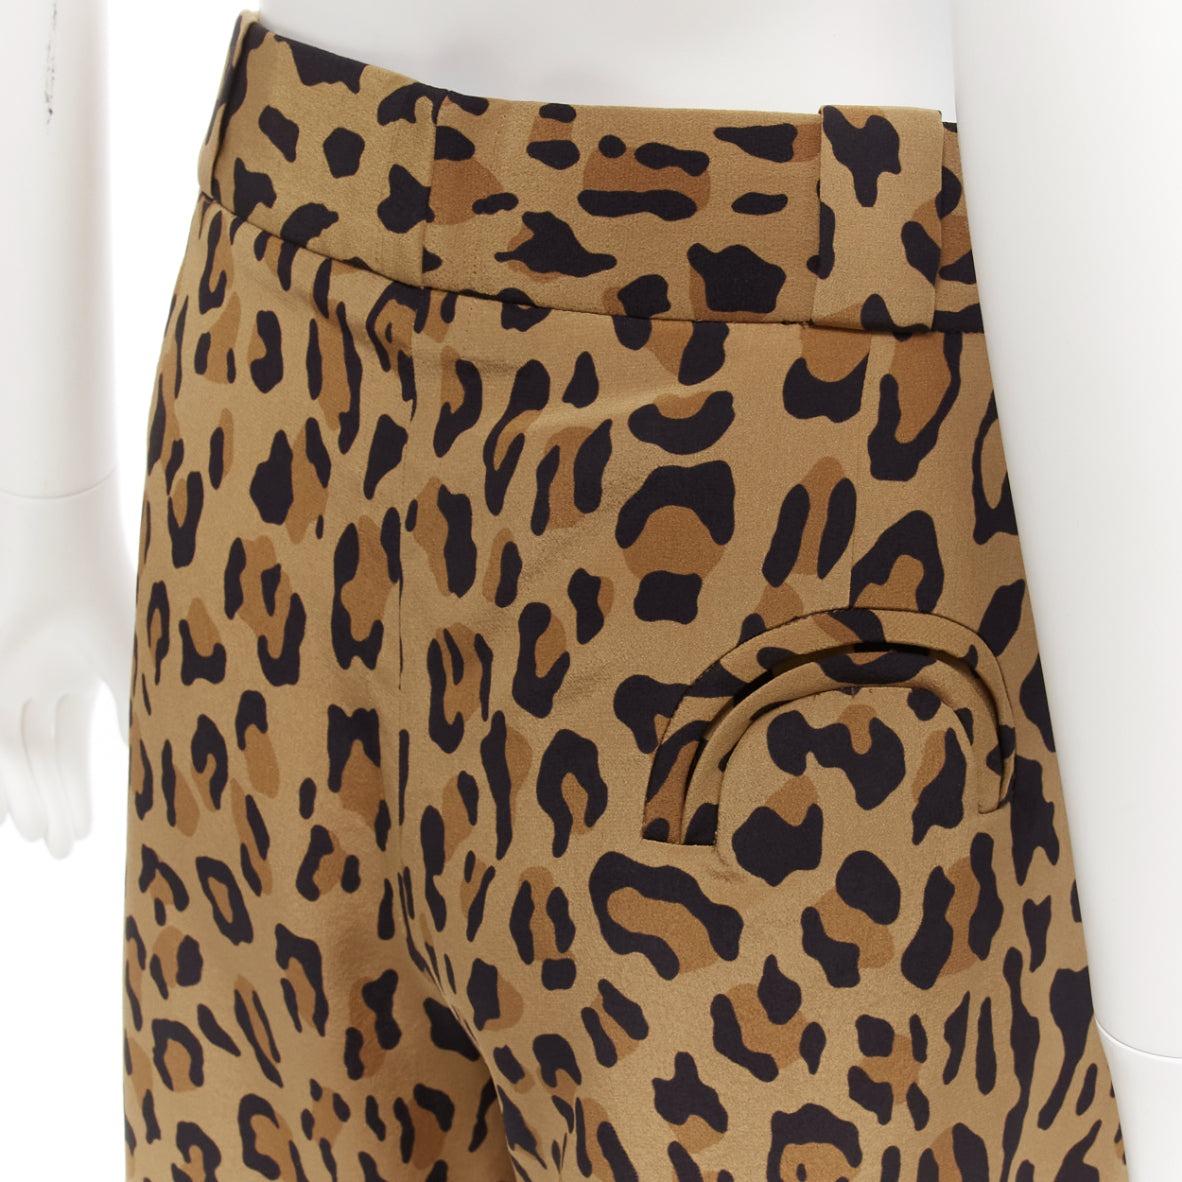 BLAZE MILANO 100% silk brown leopard print curved pocket shorts Sz. 1 S
Reference: NKLL/A00050
Brand: Blaze Milano
Material: Silk
Color: Brown
Pattern: Leopard
Closure: Zip Fly
Lining: Gold Fabric
Extra Details: Curved decorative pocket at